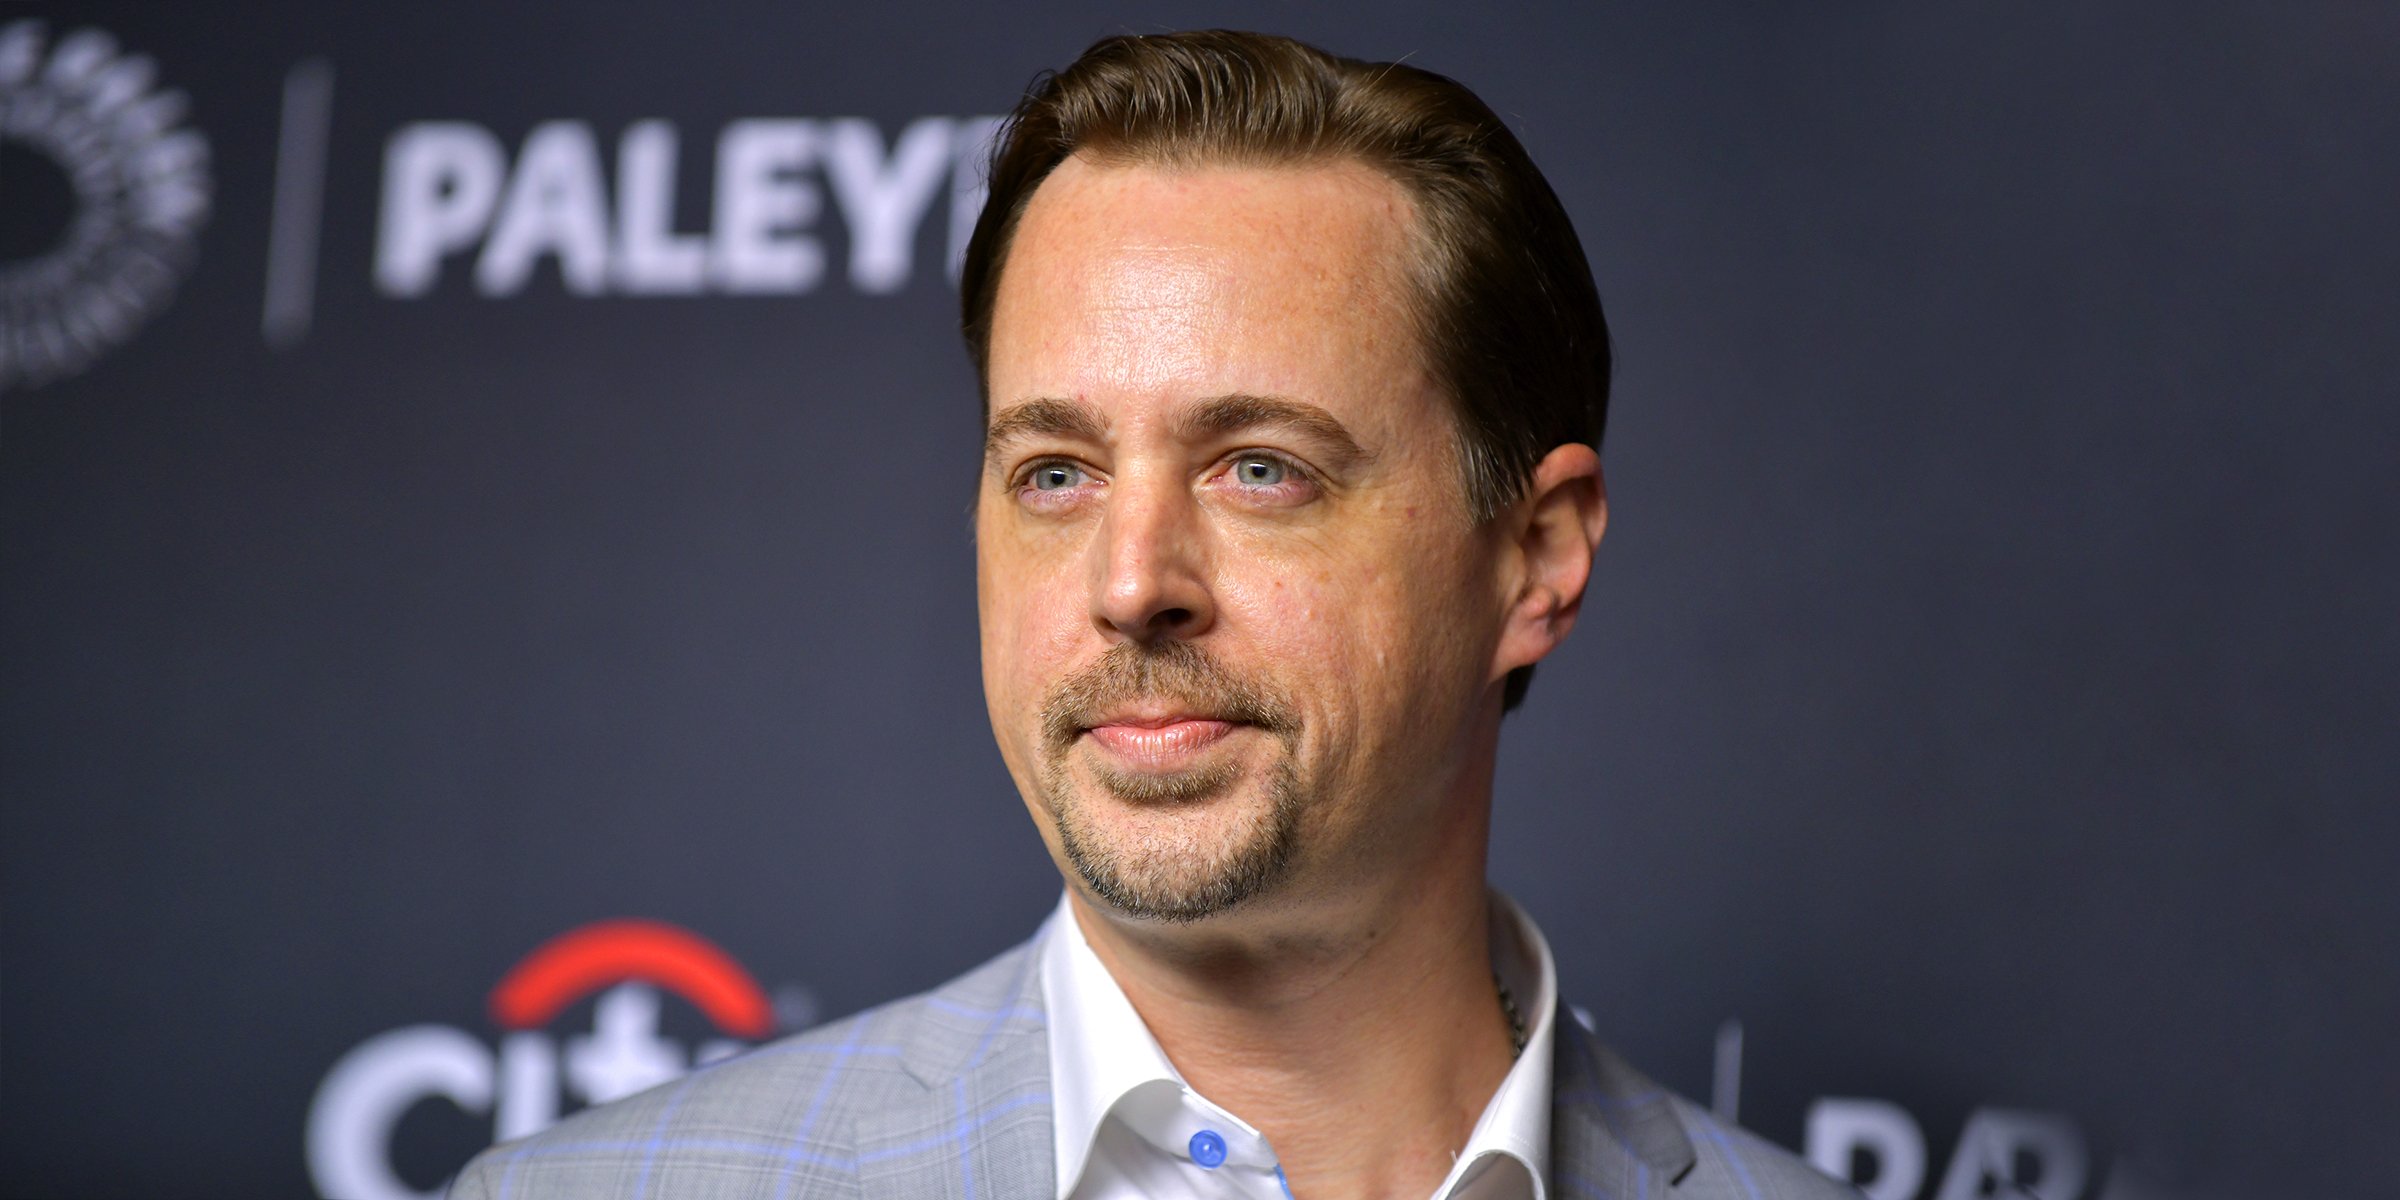 Sean Murray | Source: Getty Images